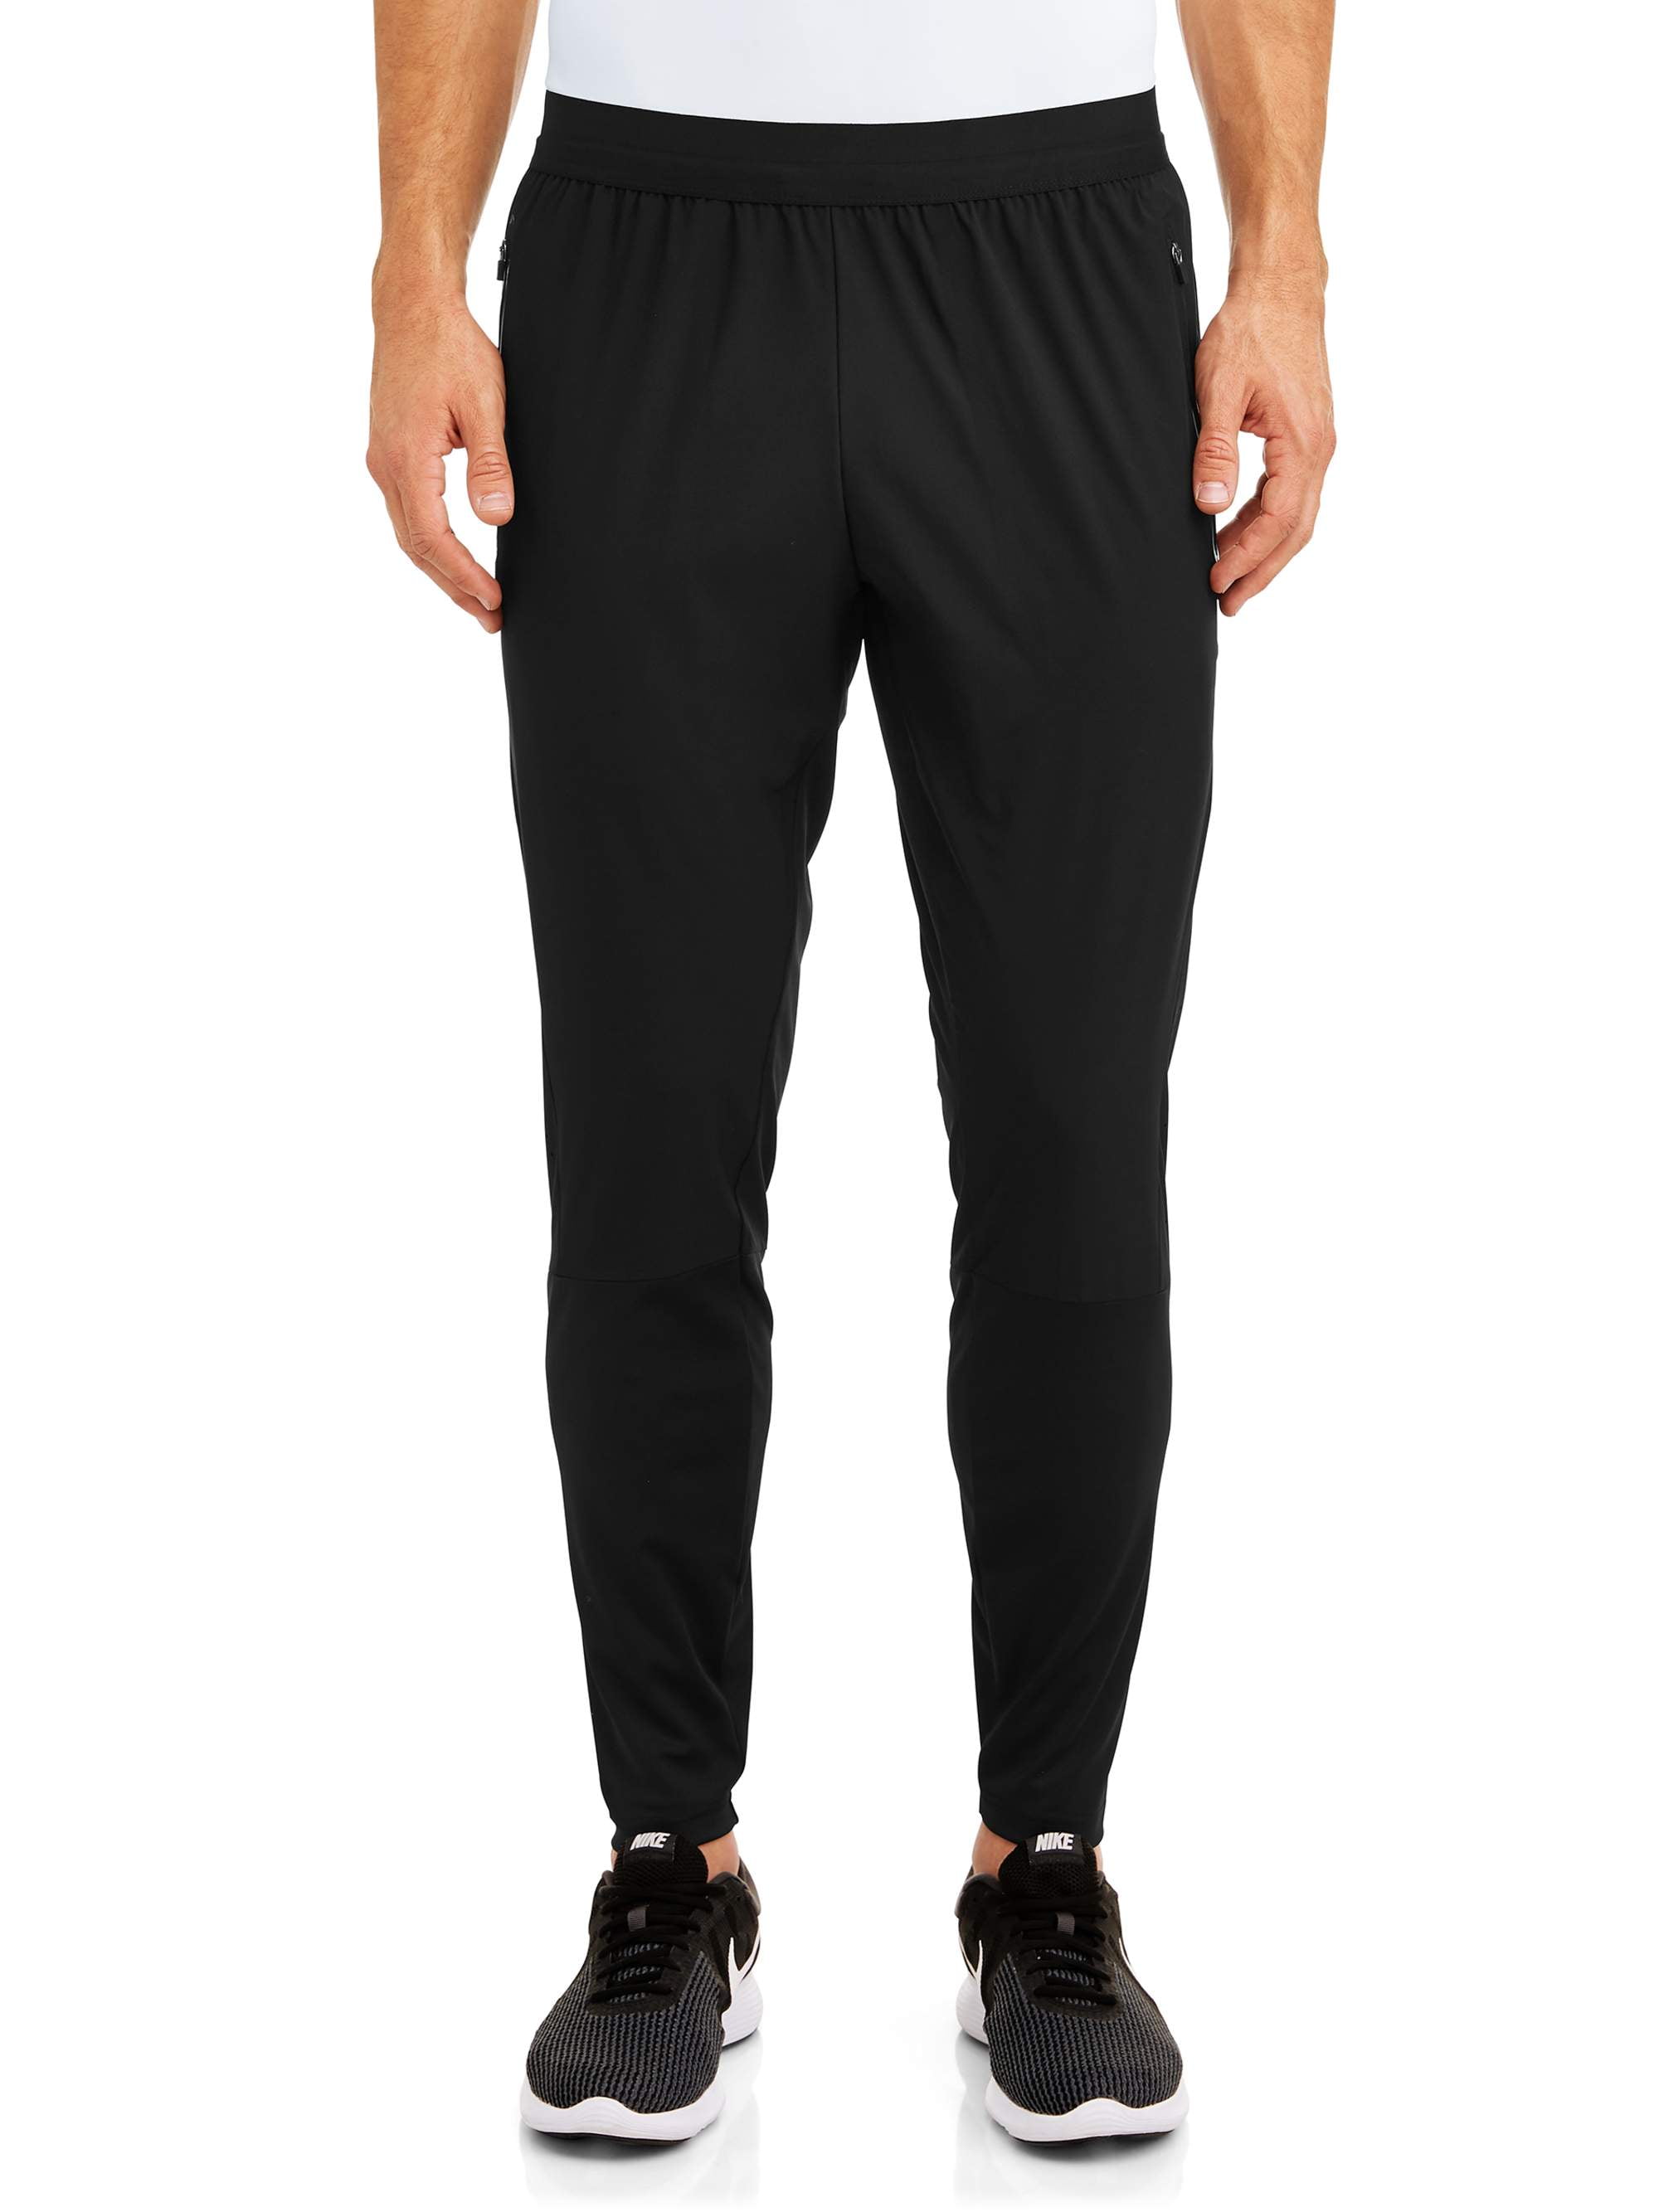 Russell Men's and Big Men's Hybrid Running Pant, up to 5XL - Walmart.com